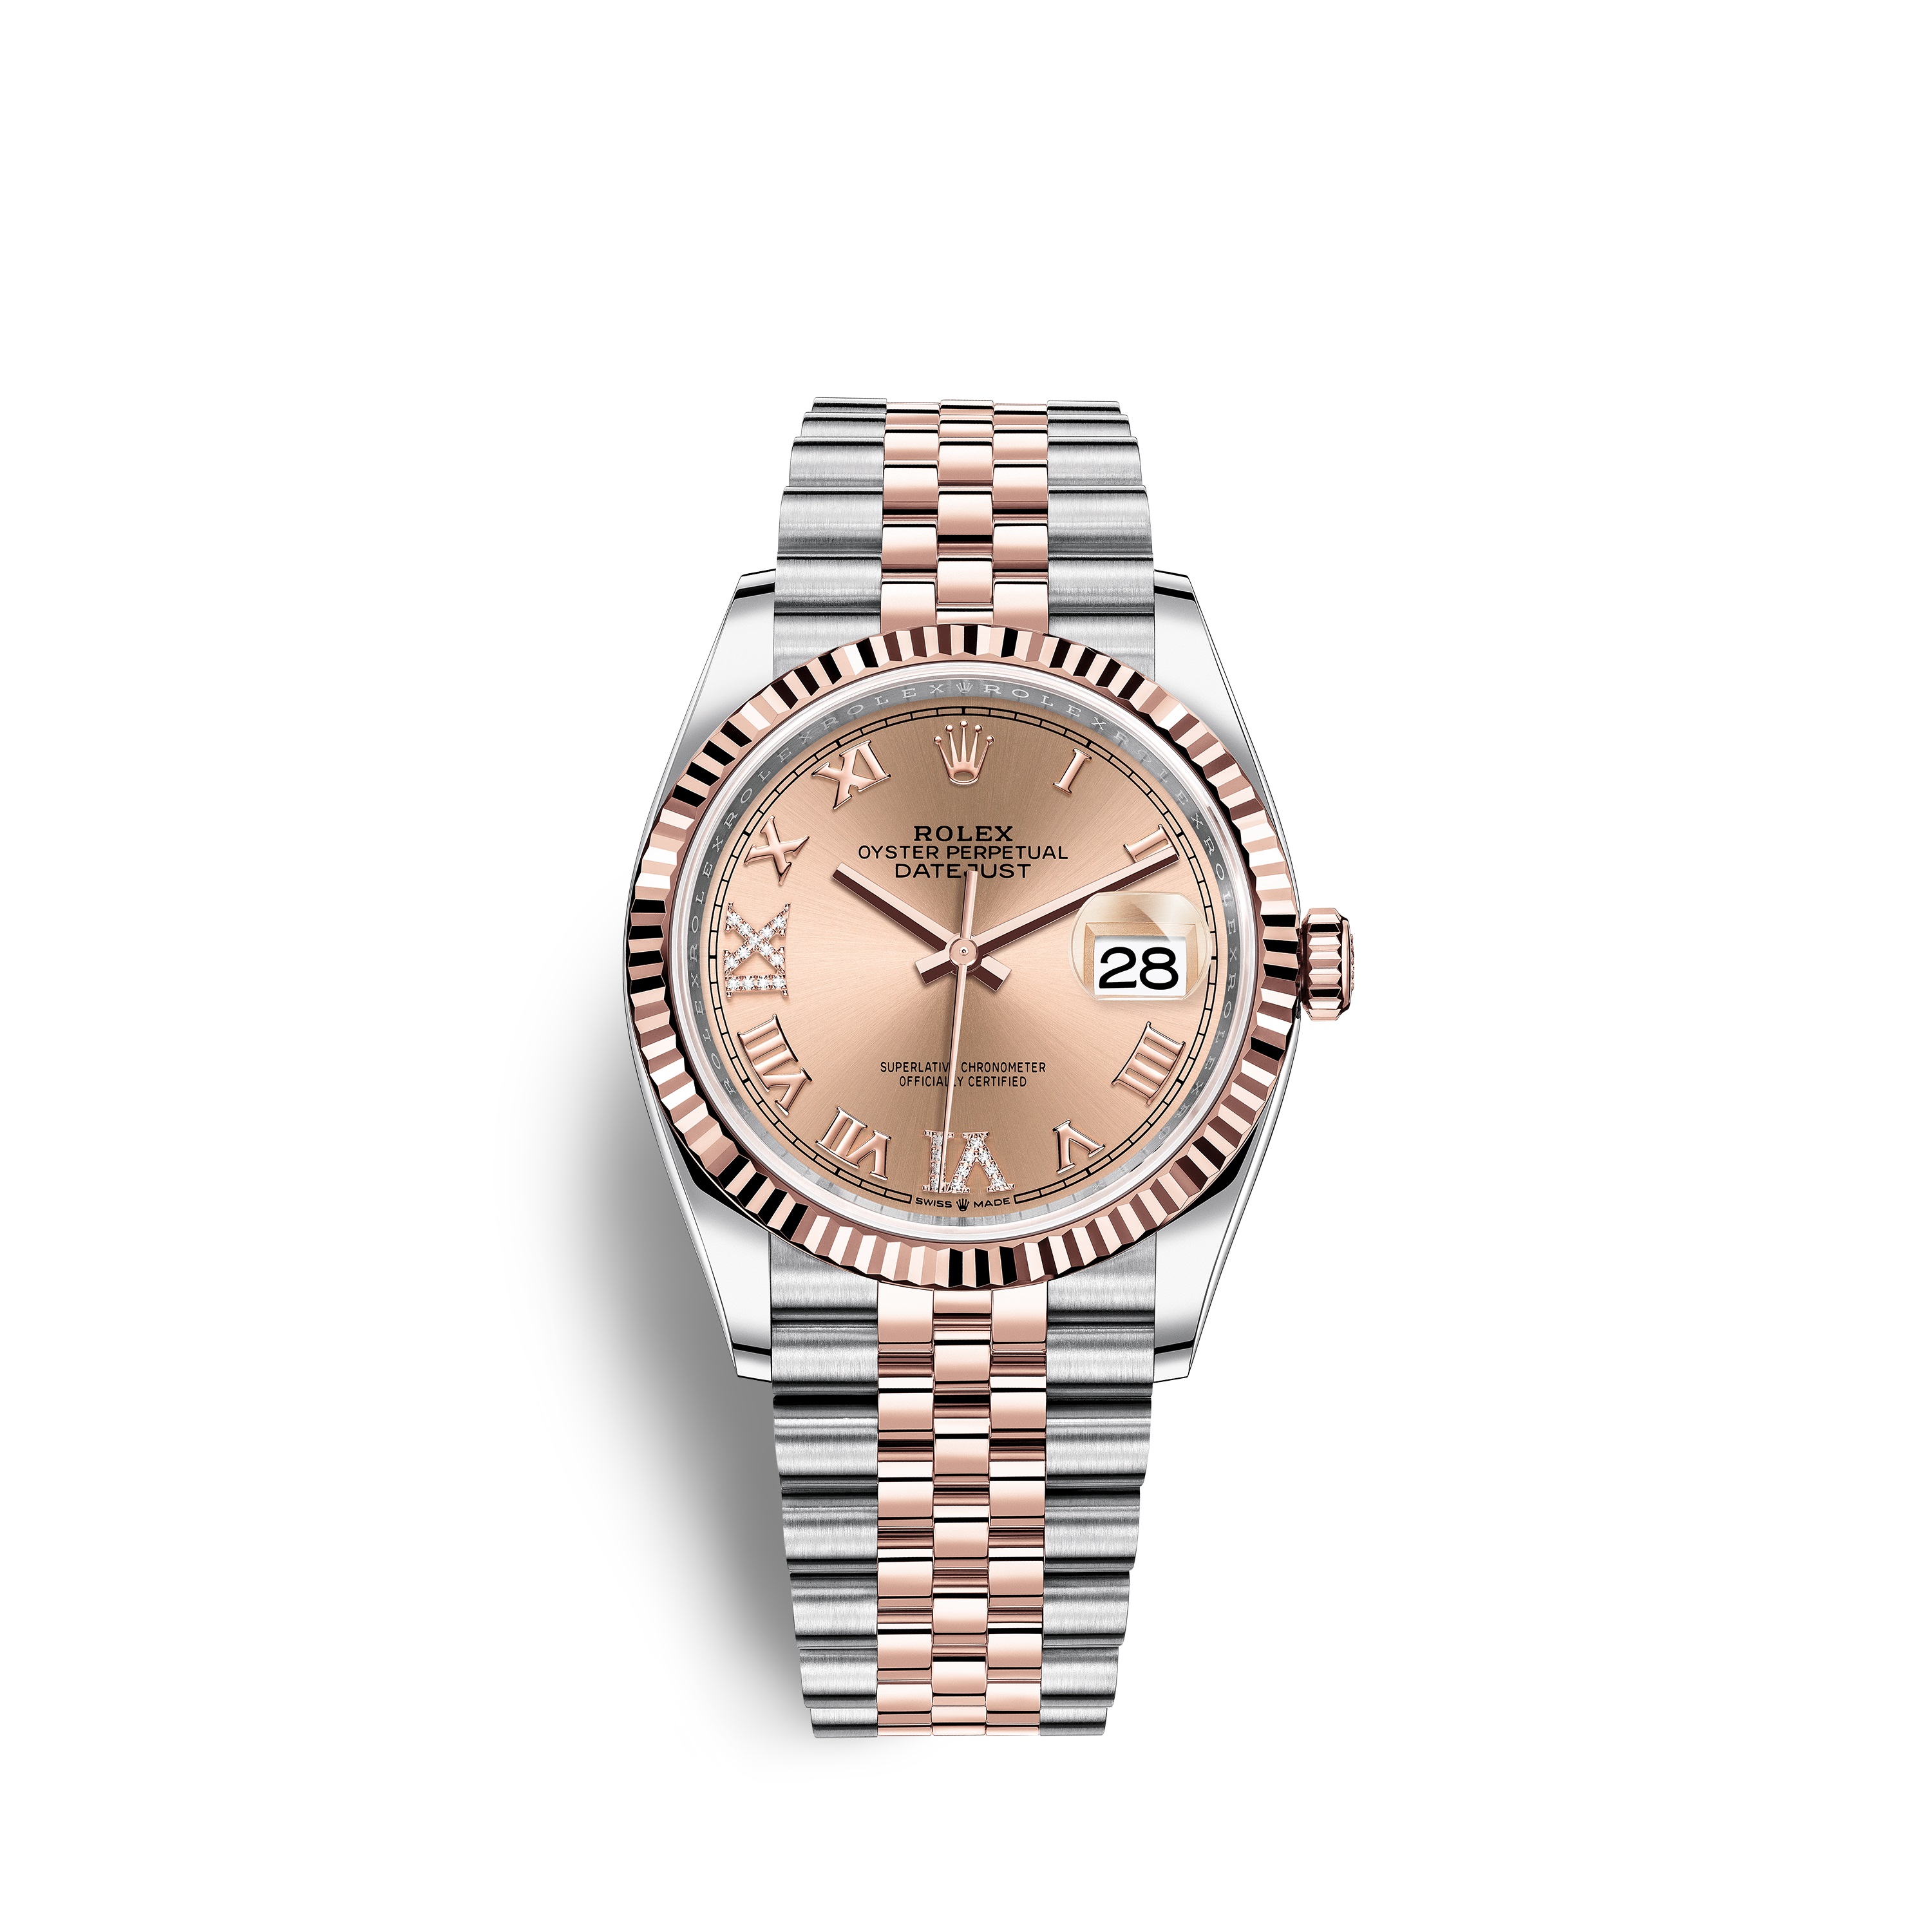 Datejust 36 126231 Rose Gold & Stainless Steel Watch (Rose Set with Diamonds)